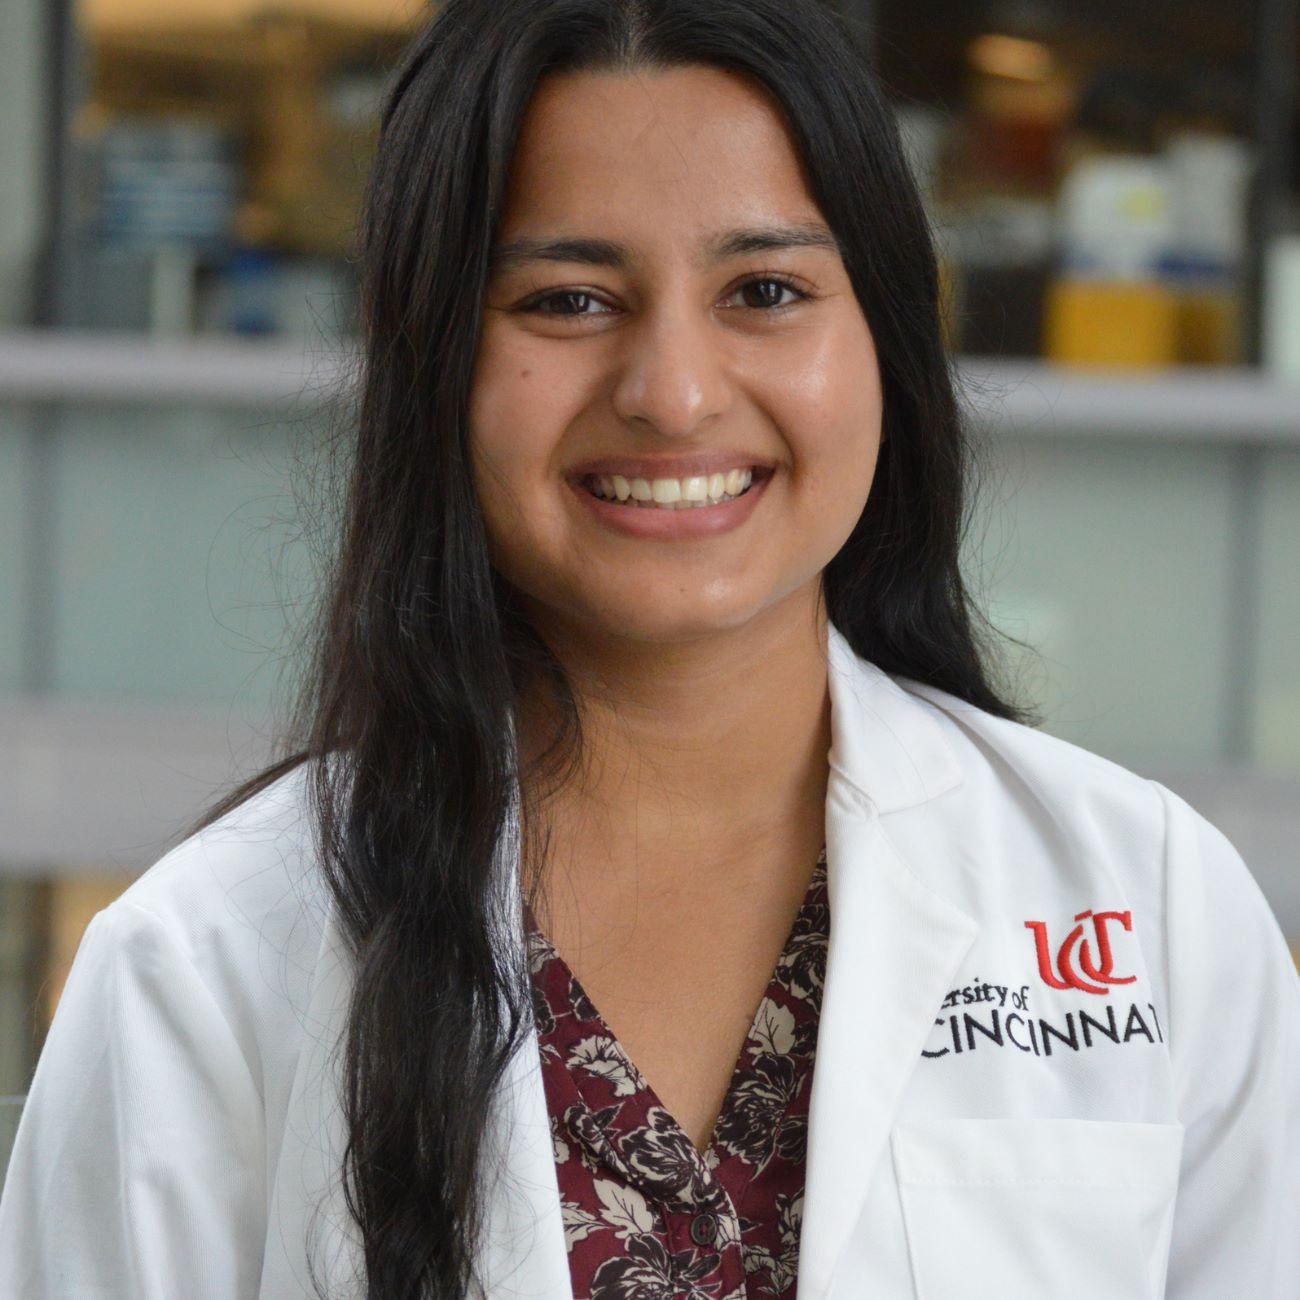 Sweta in a white coat is smiling for the picture.